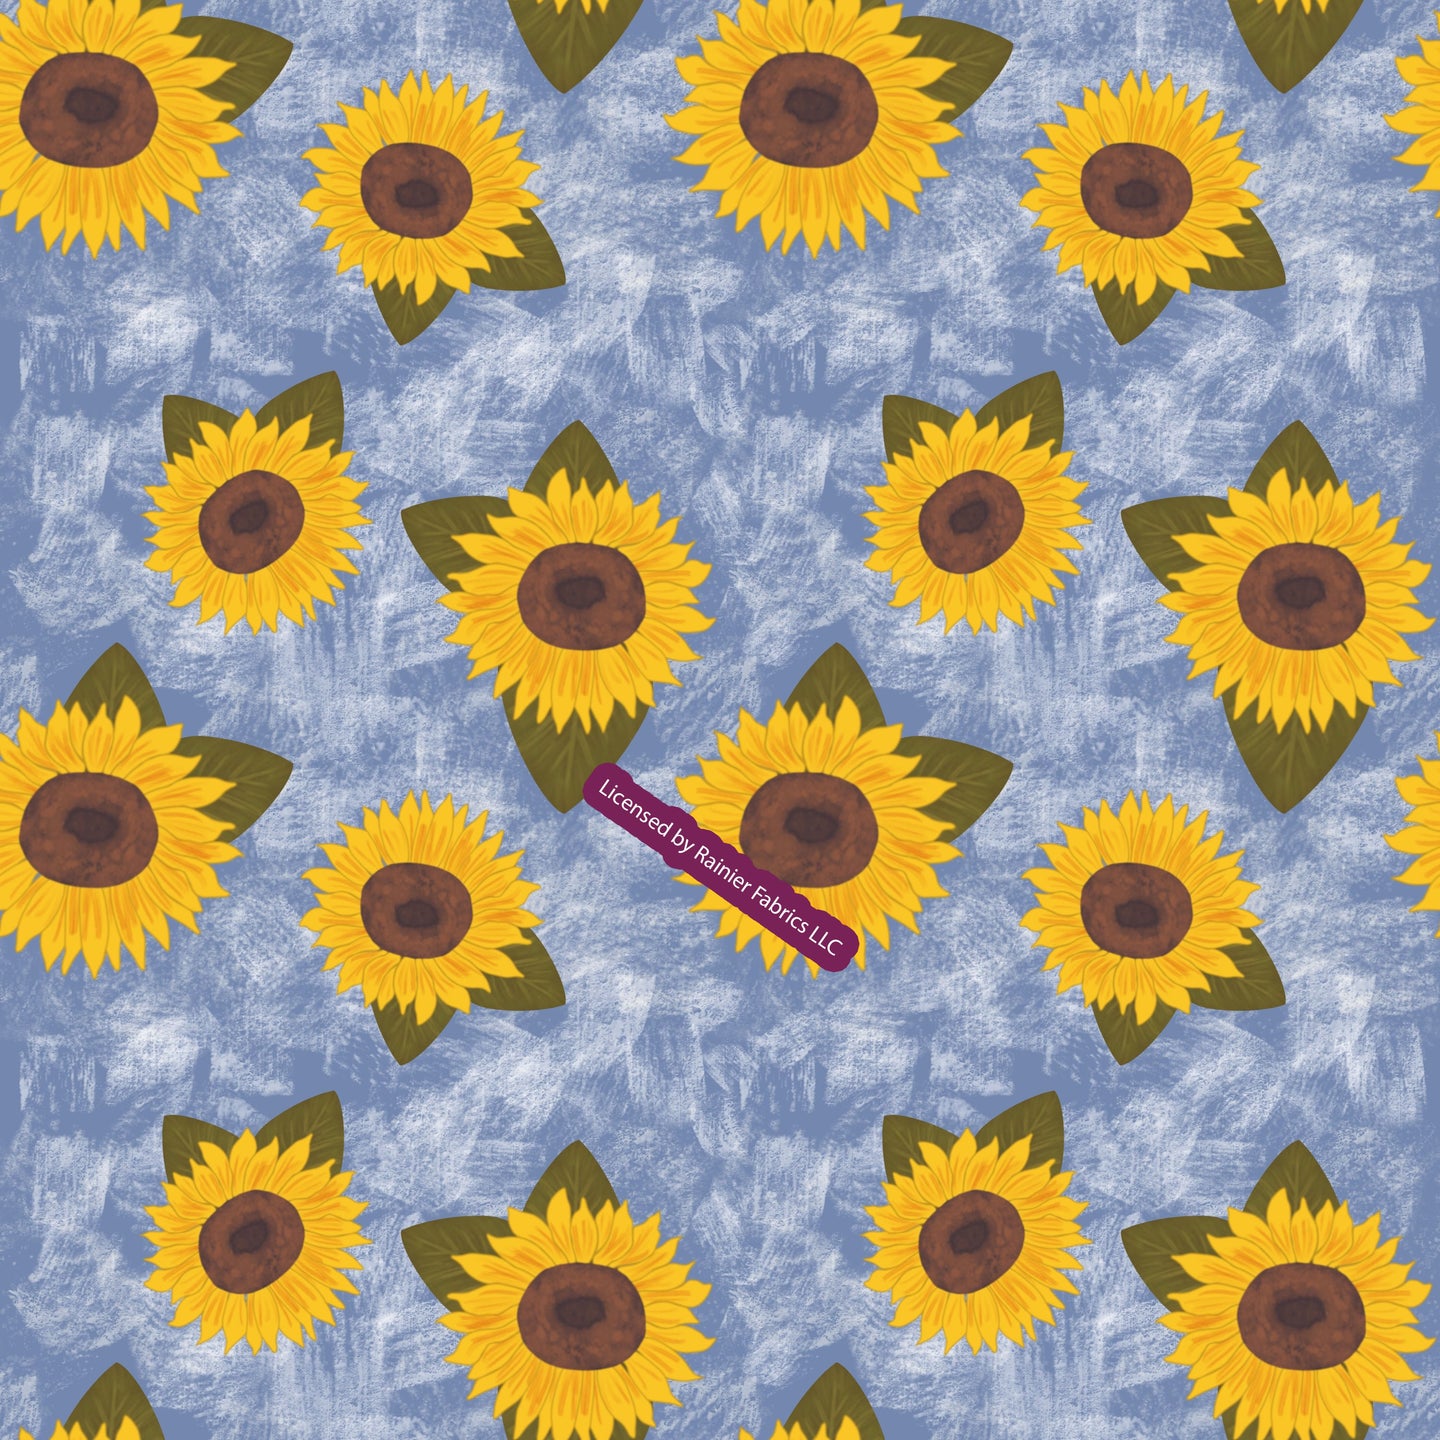 Sunflowers by Artist NinaOrder by half yard - See below for instructions on ordering and base fabrics